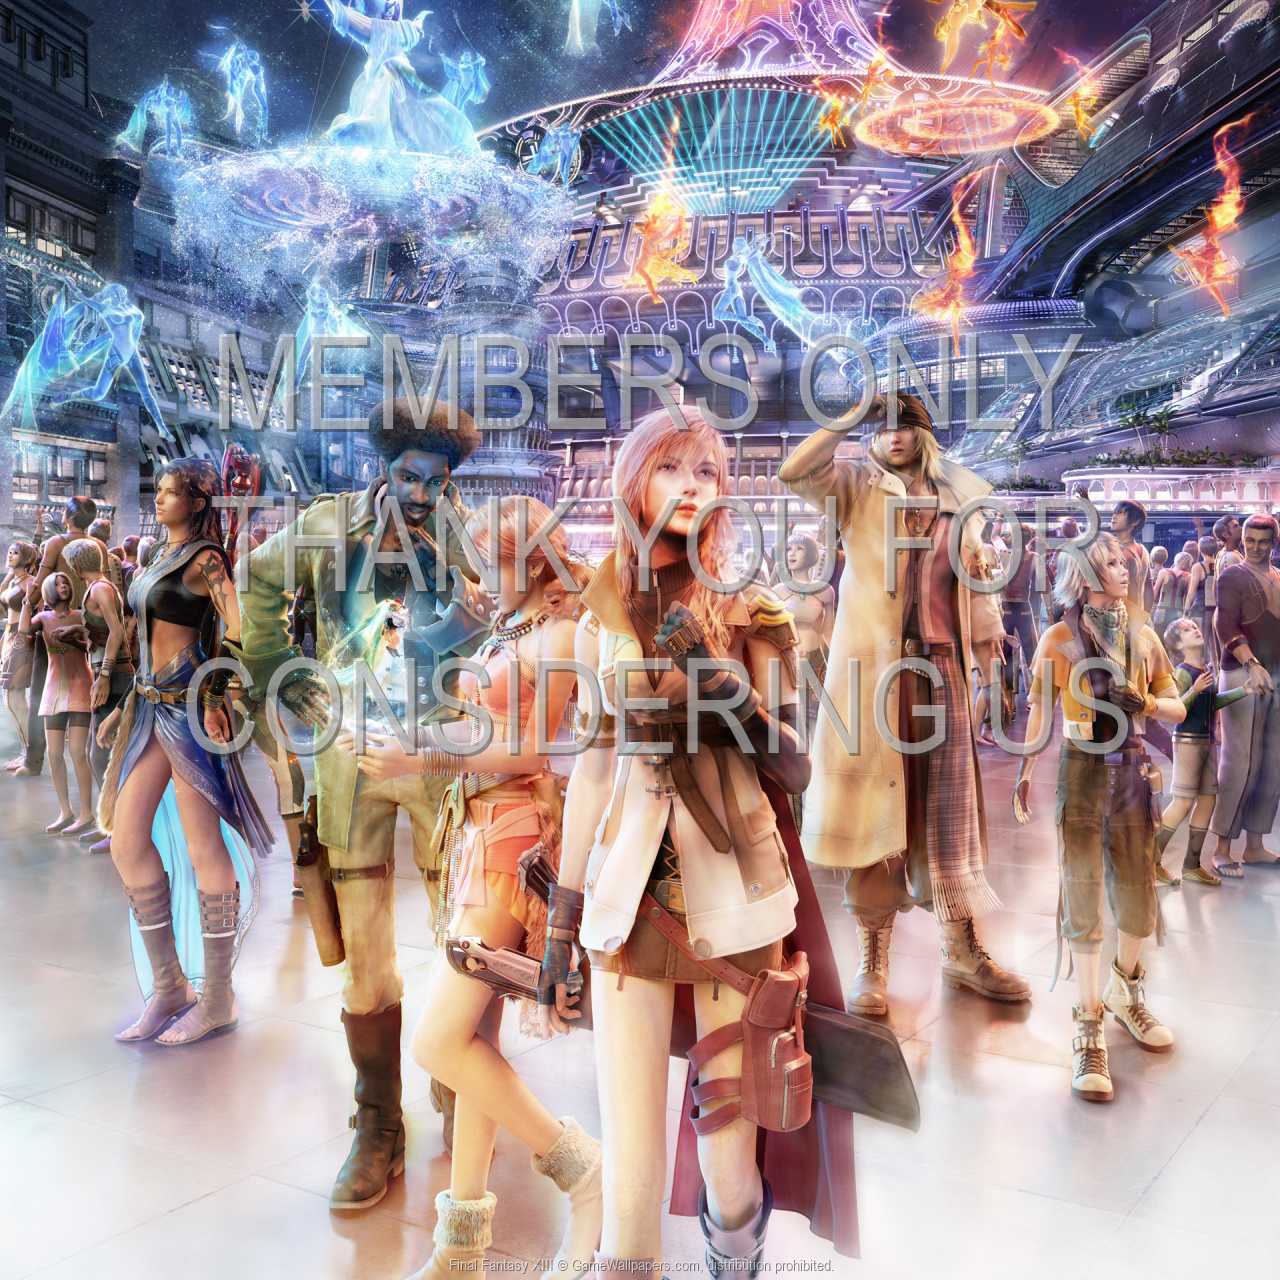 Final Fantasy XIII 720p%20Horizontal Mobile wallpaper or background 11